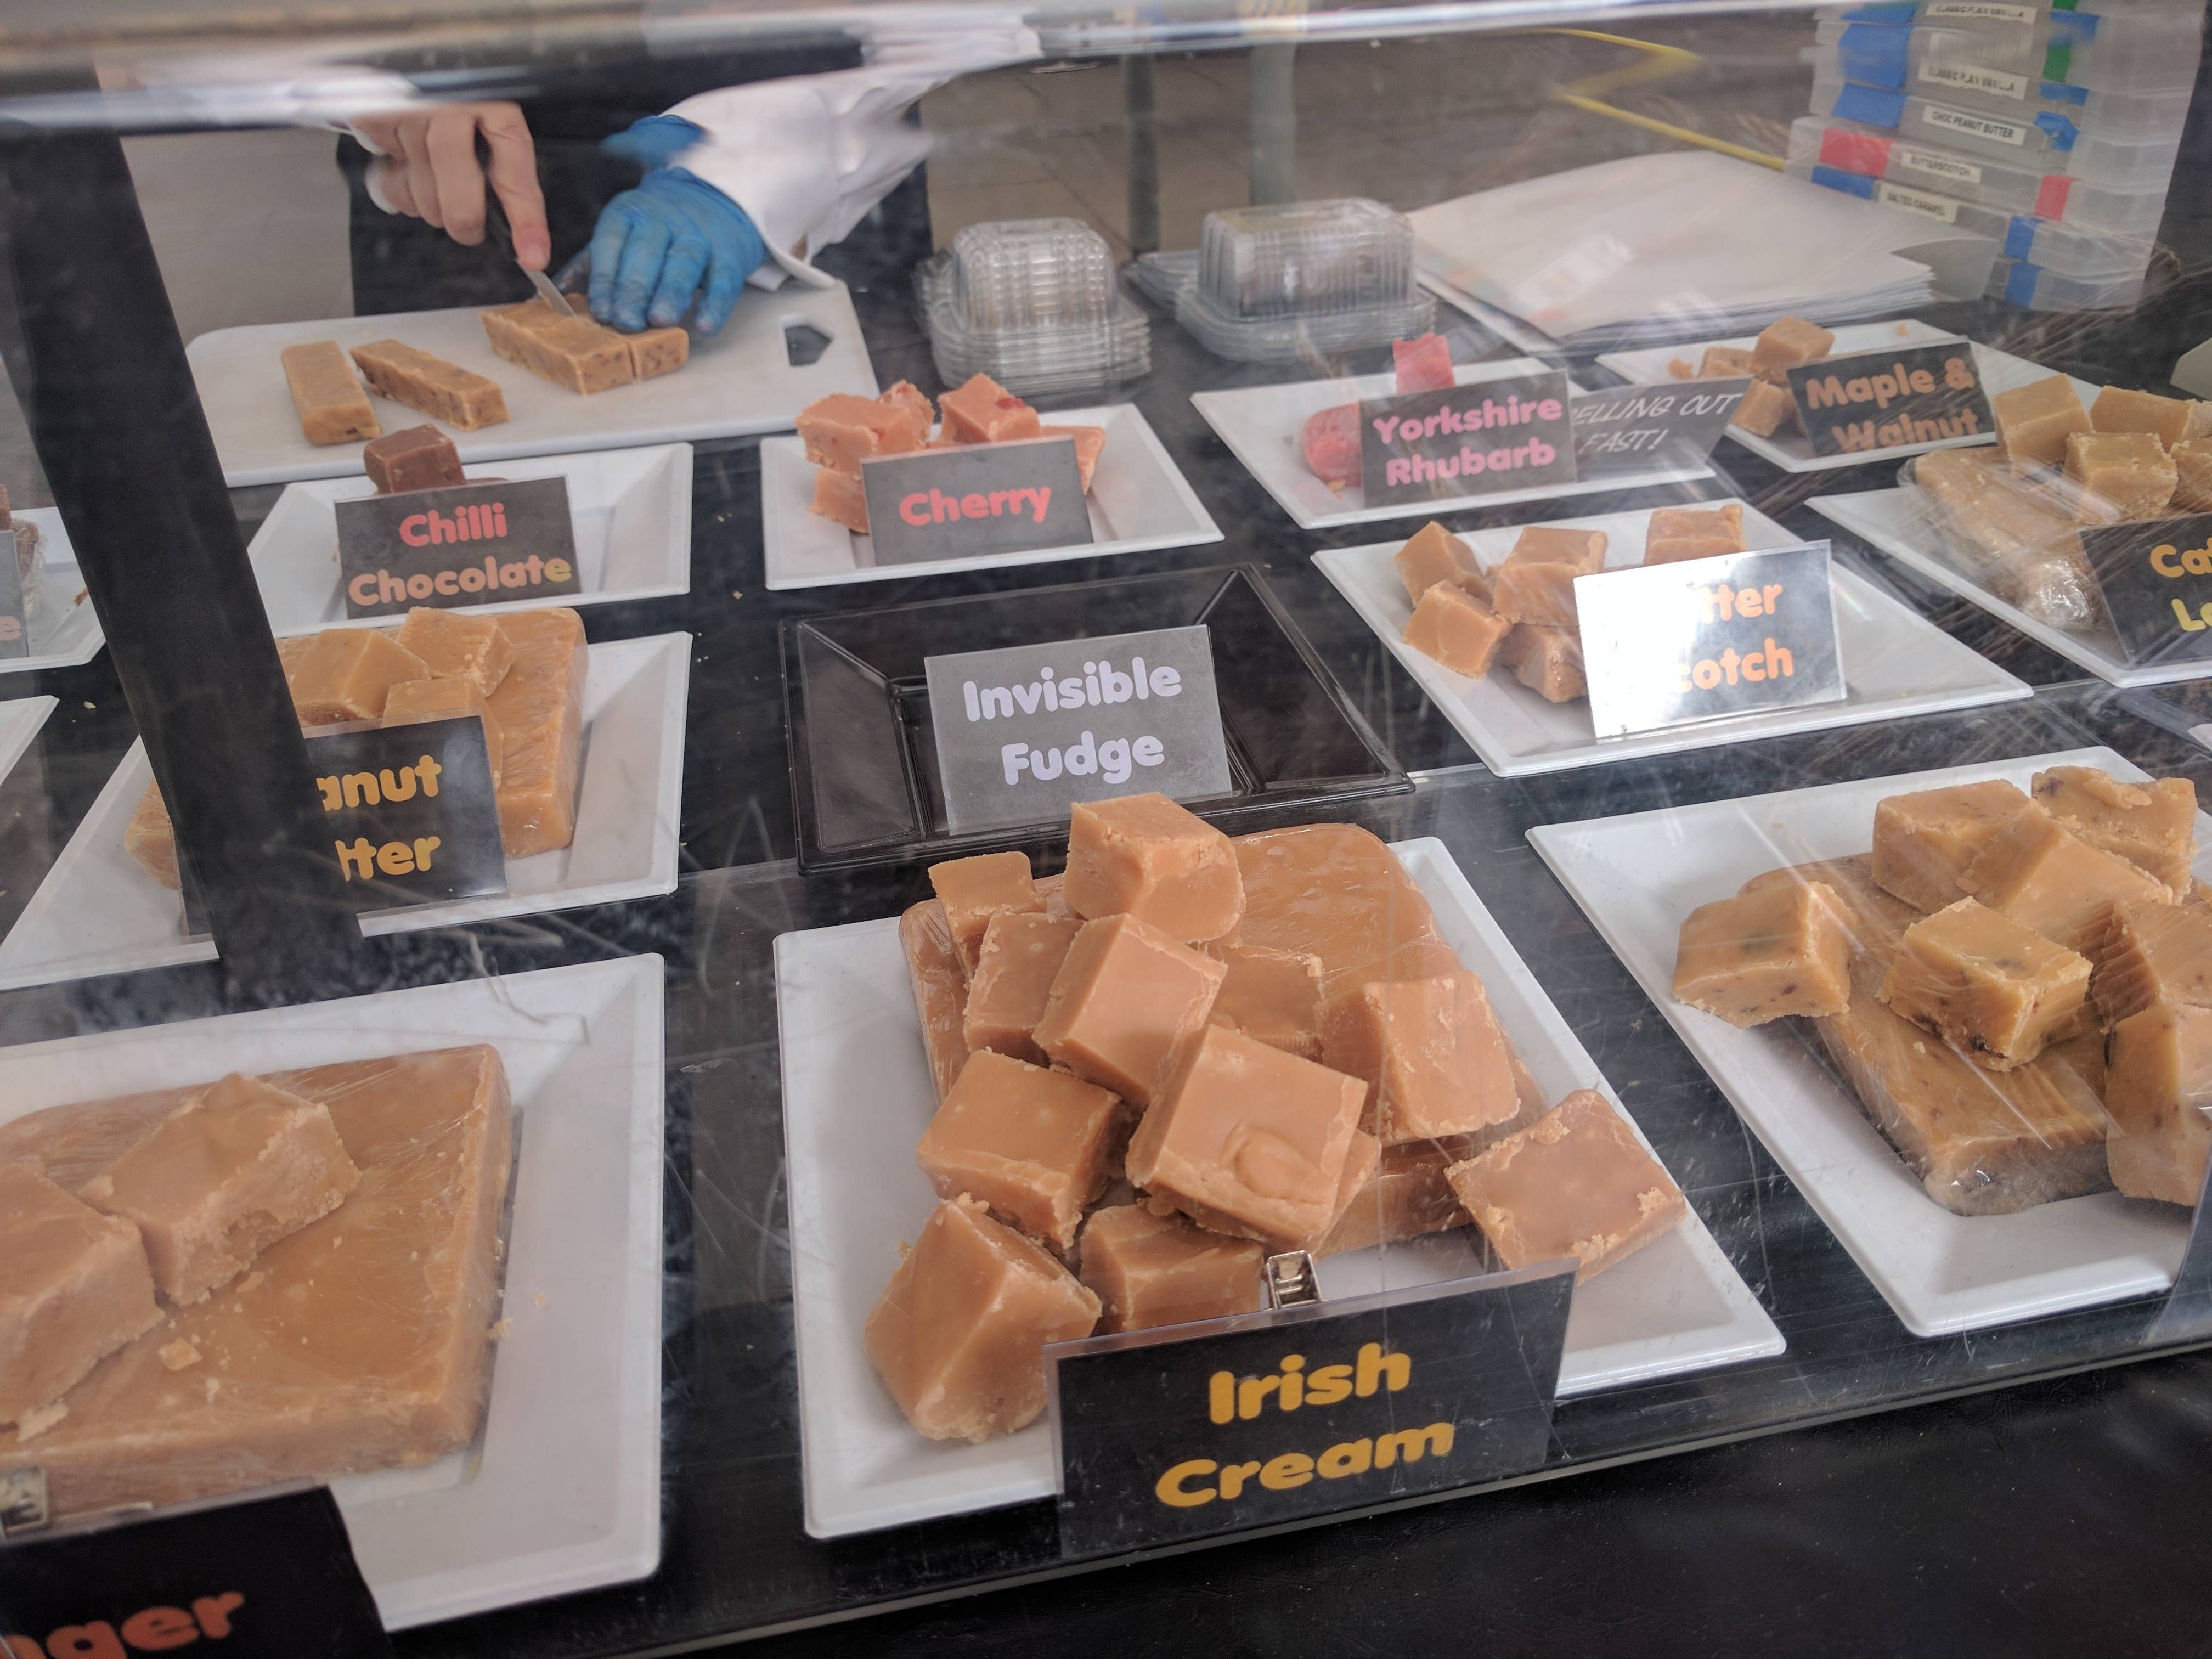 The fudge man came up with an option for people who asked for dairy/ sugar free fudge